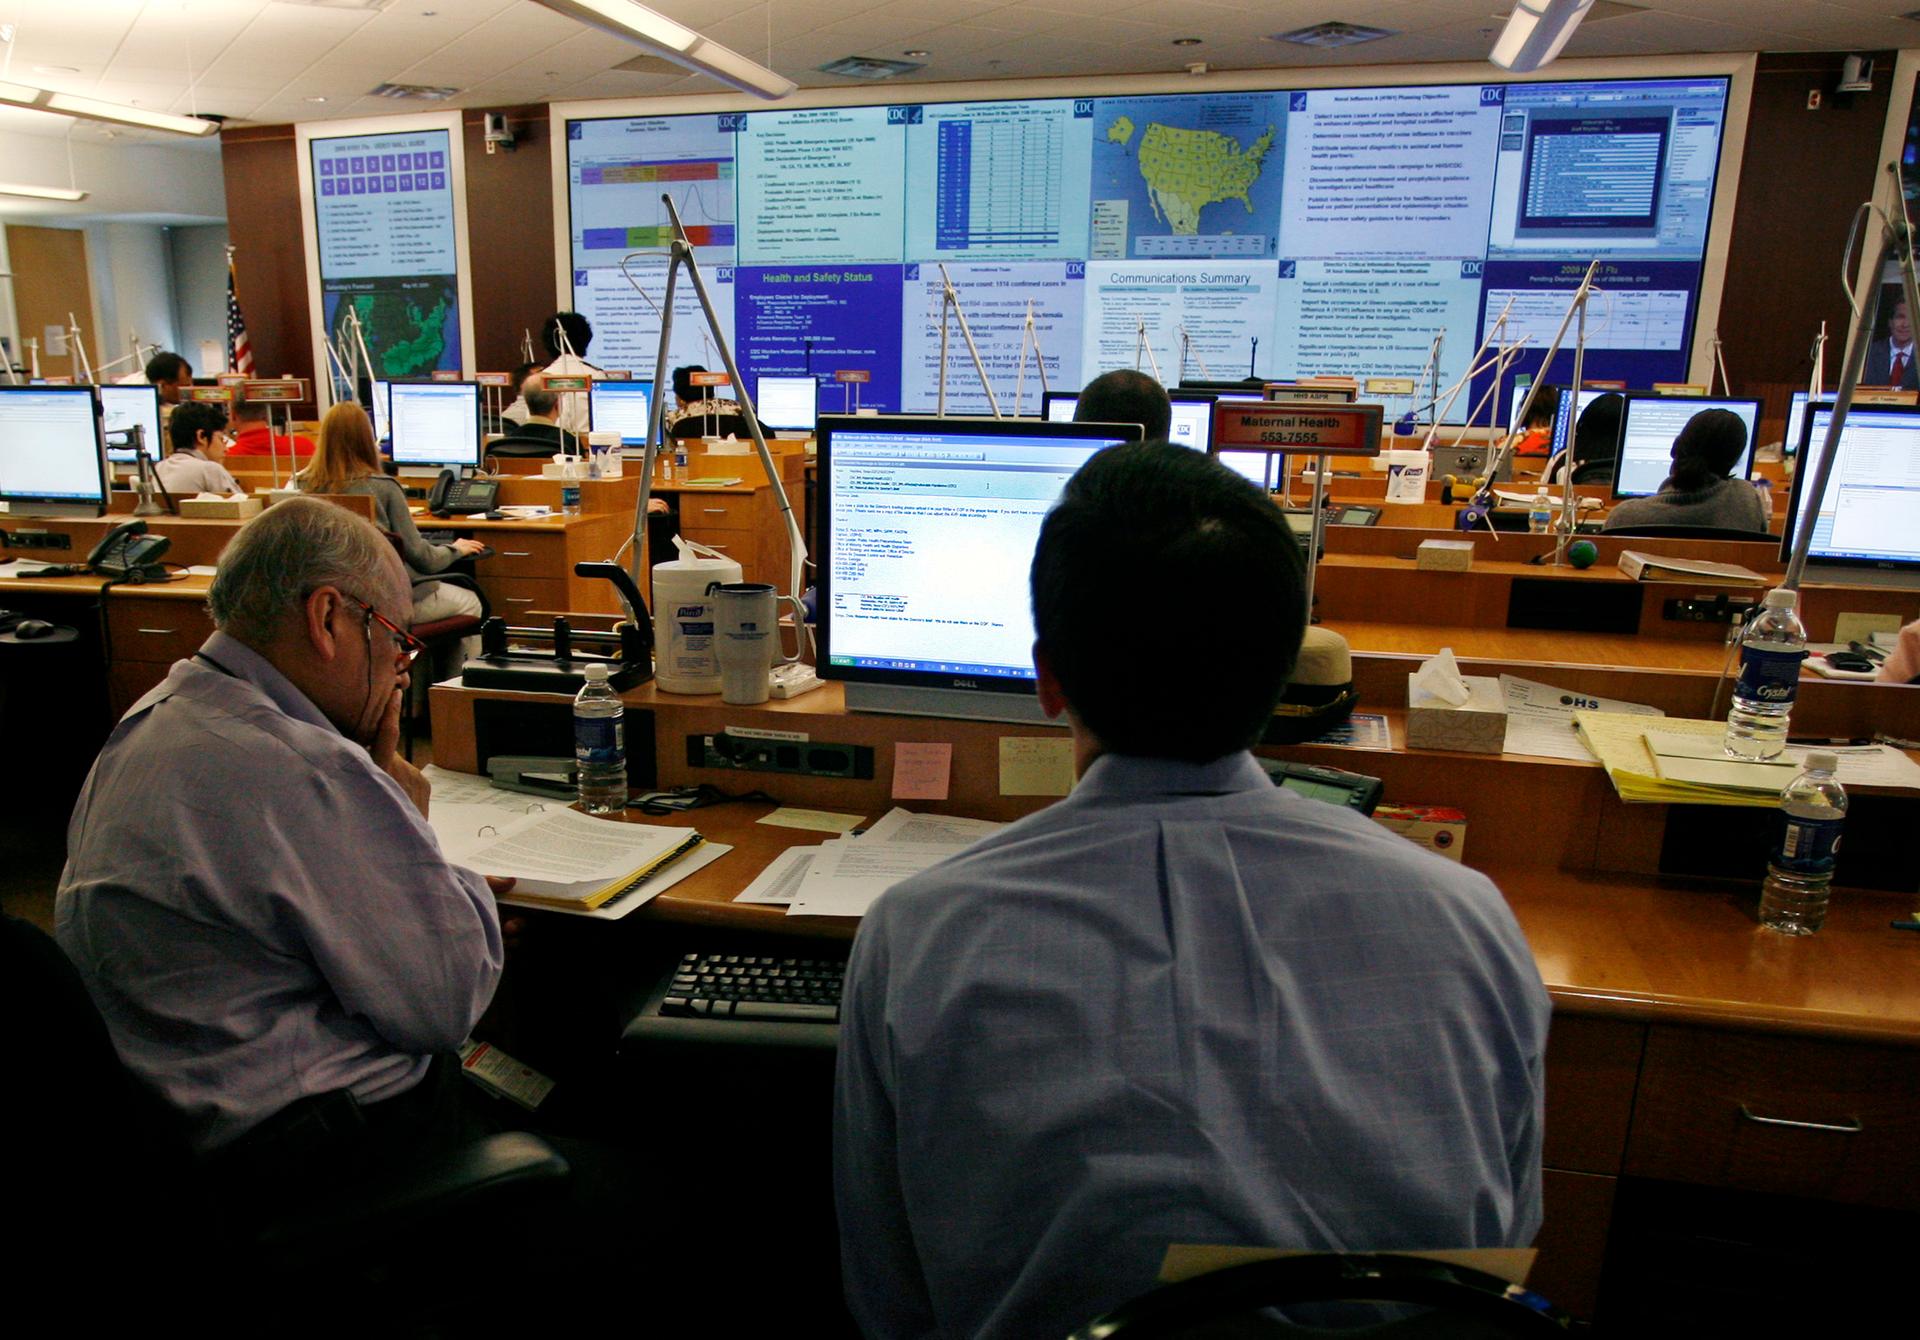 Centers for Disease Control workers monitor the H1N1 flu virus outbreak from the CDC Emergency Operations Center in Atlanta, Georgia May 6, 2009.